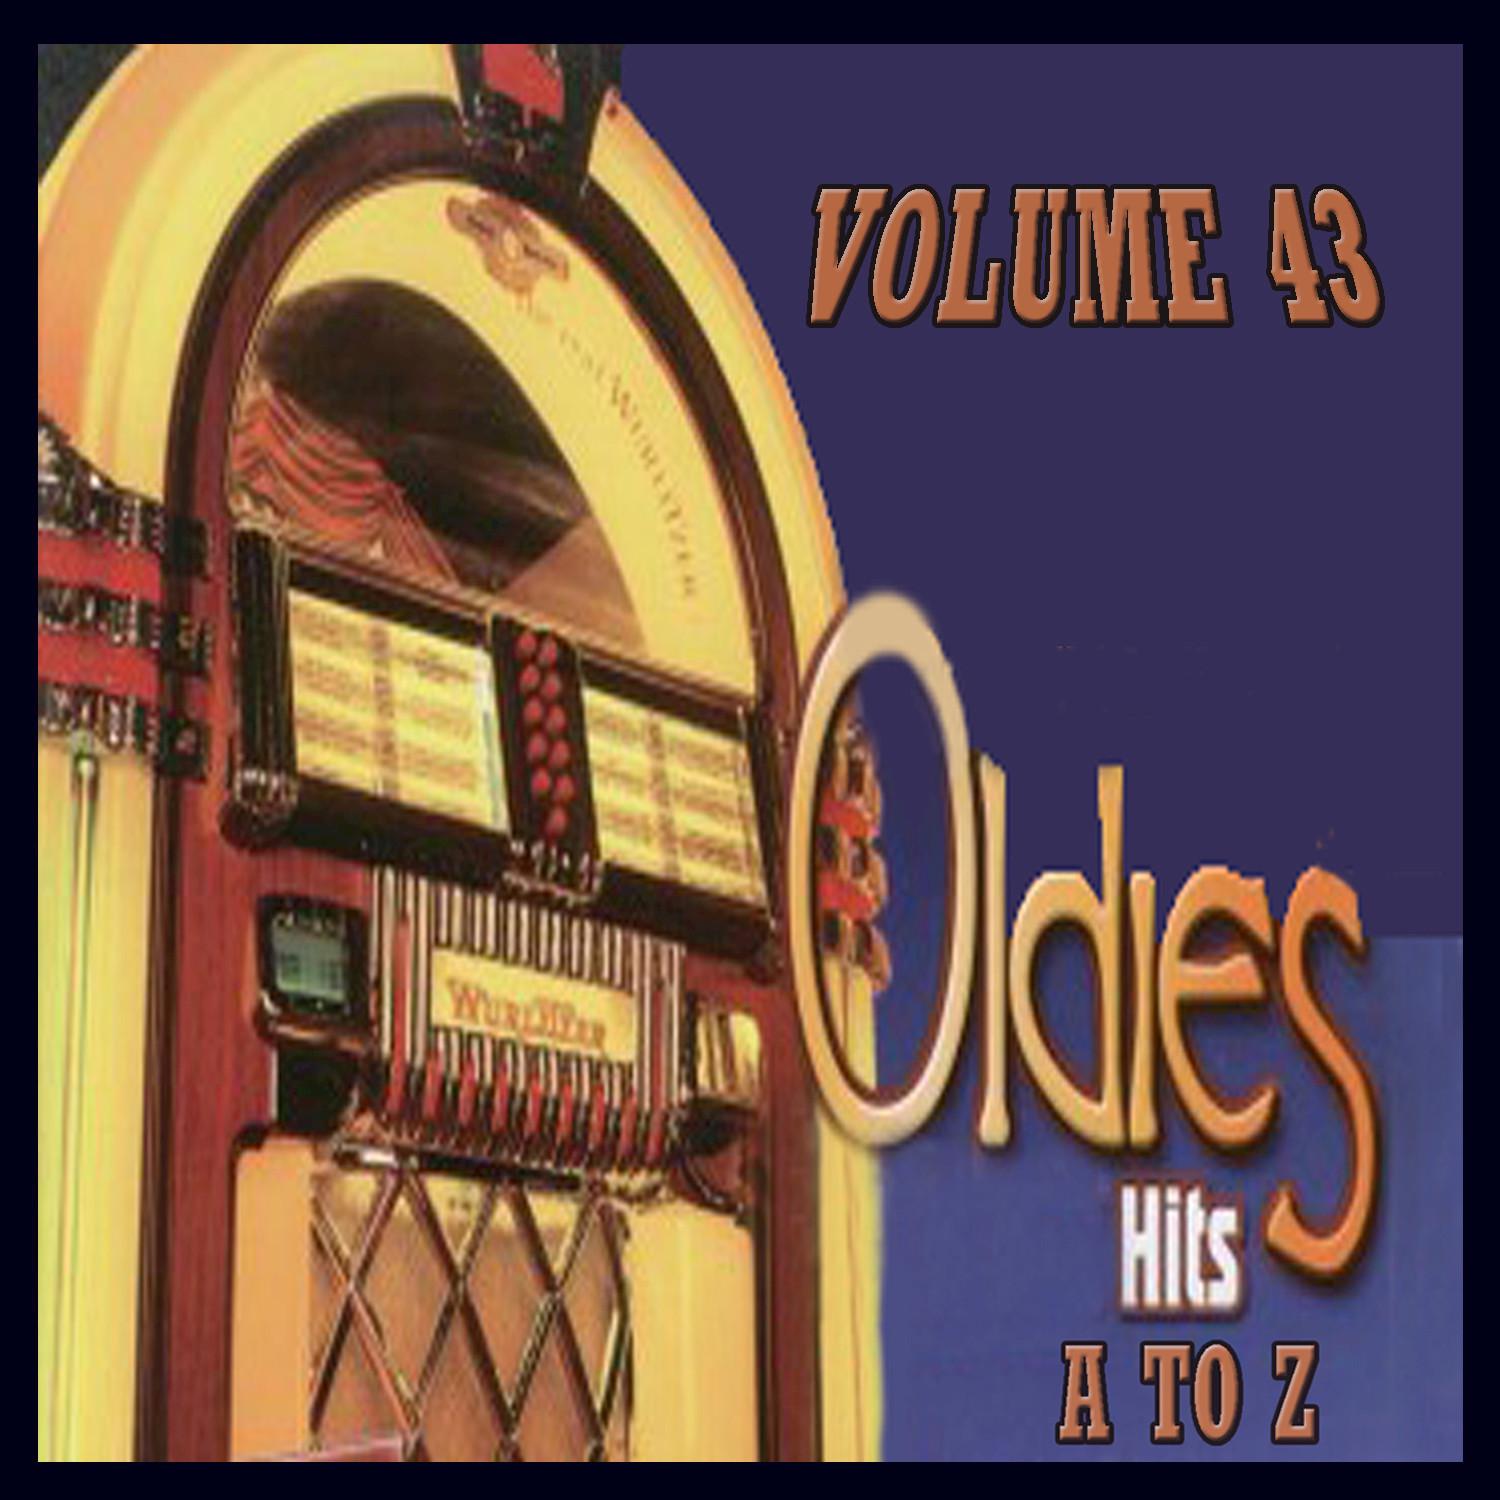 Oldies Hits A to Z, Vol.43